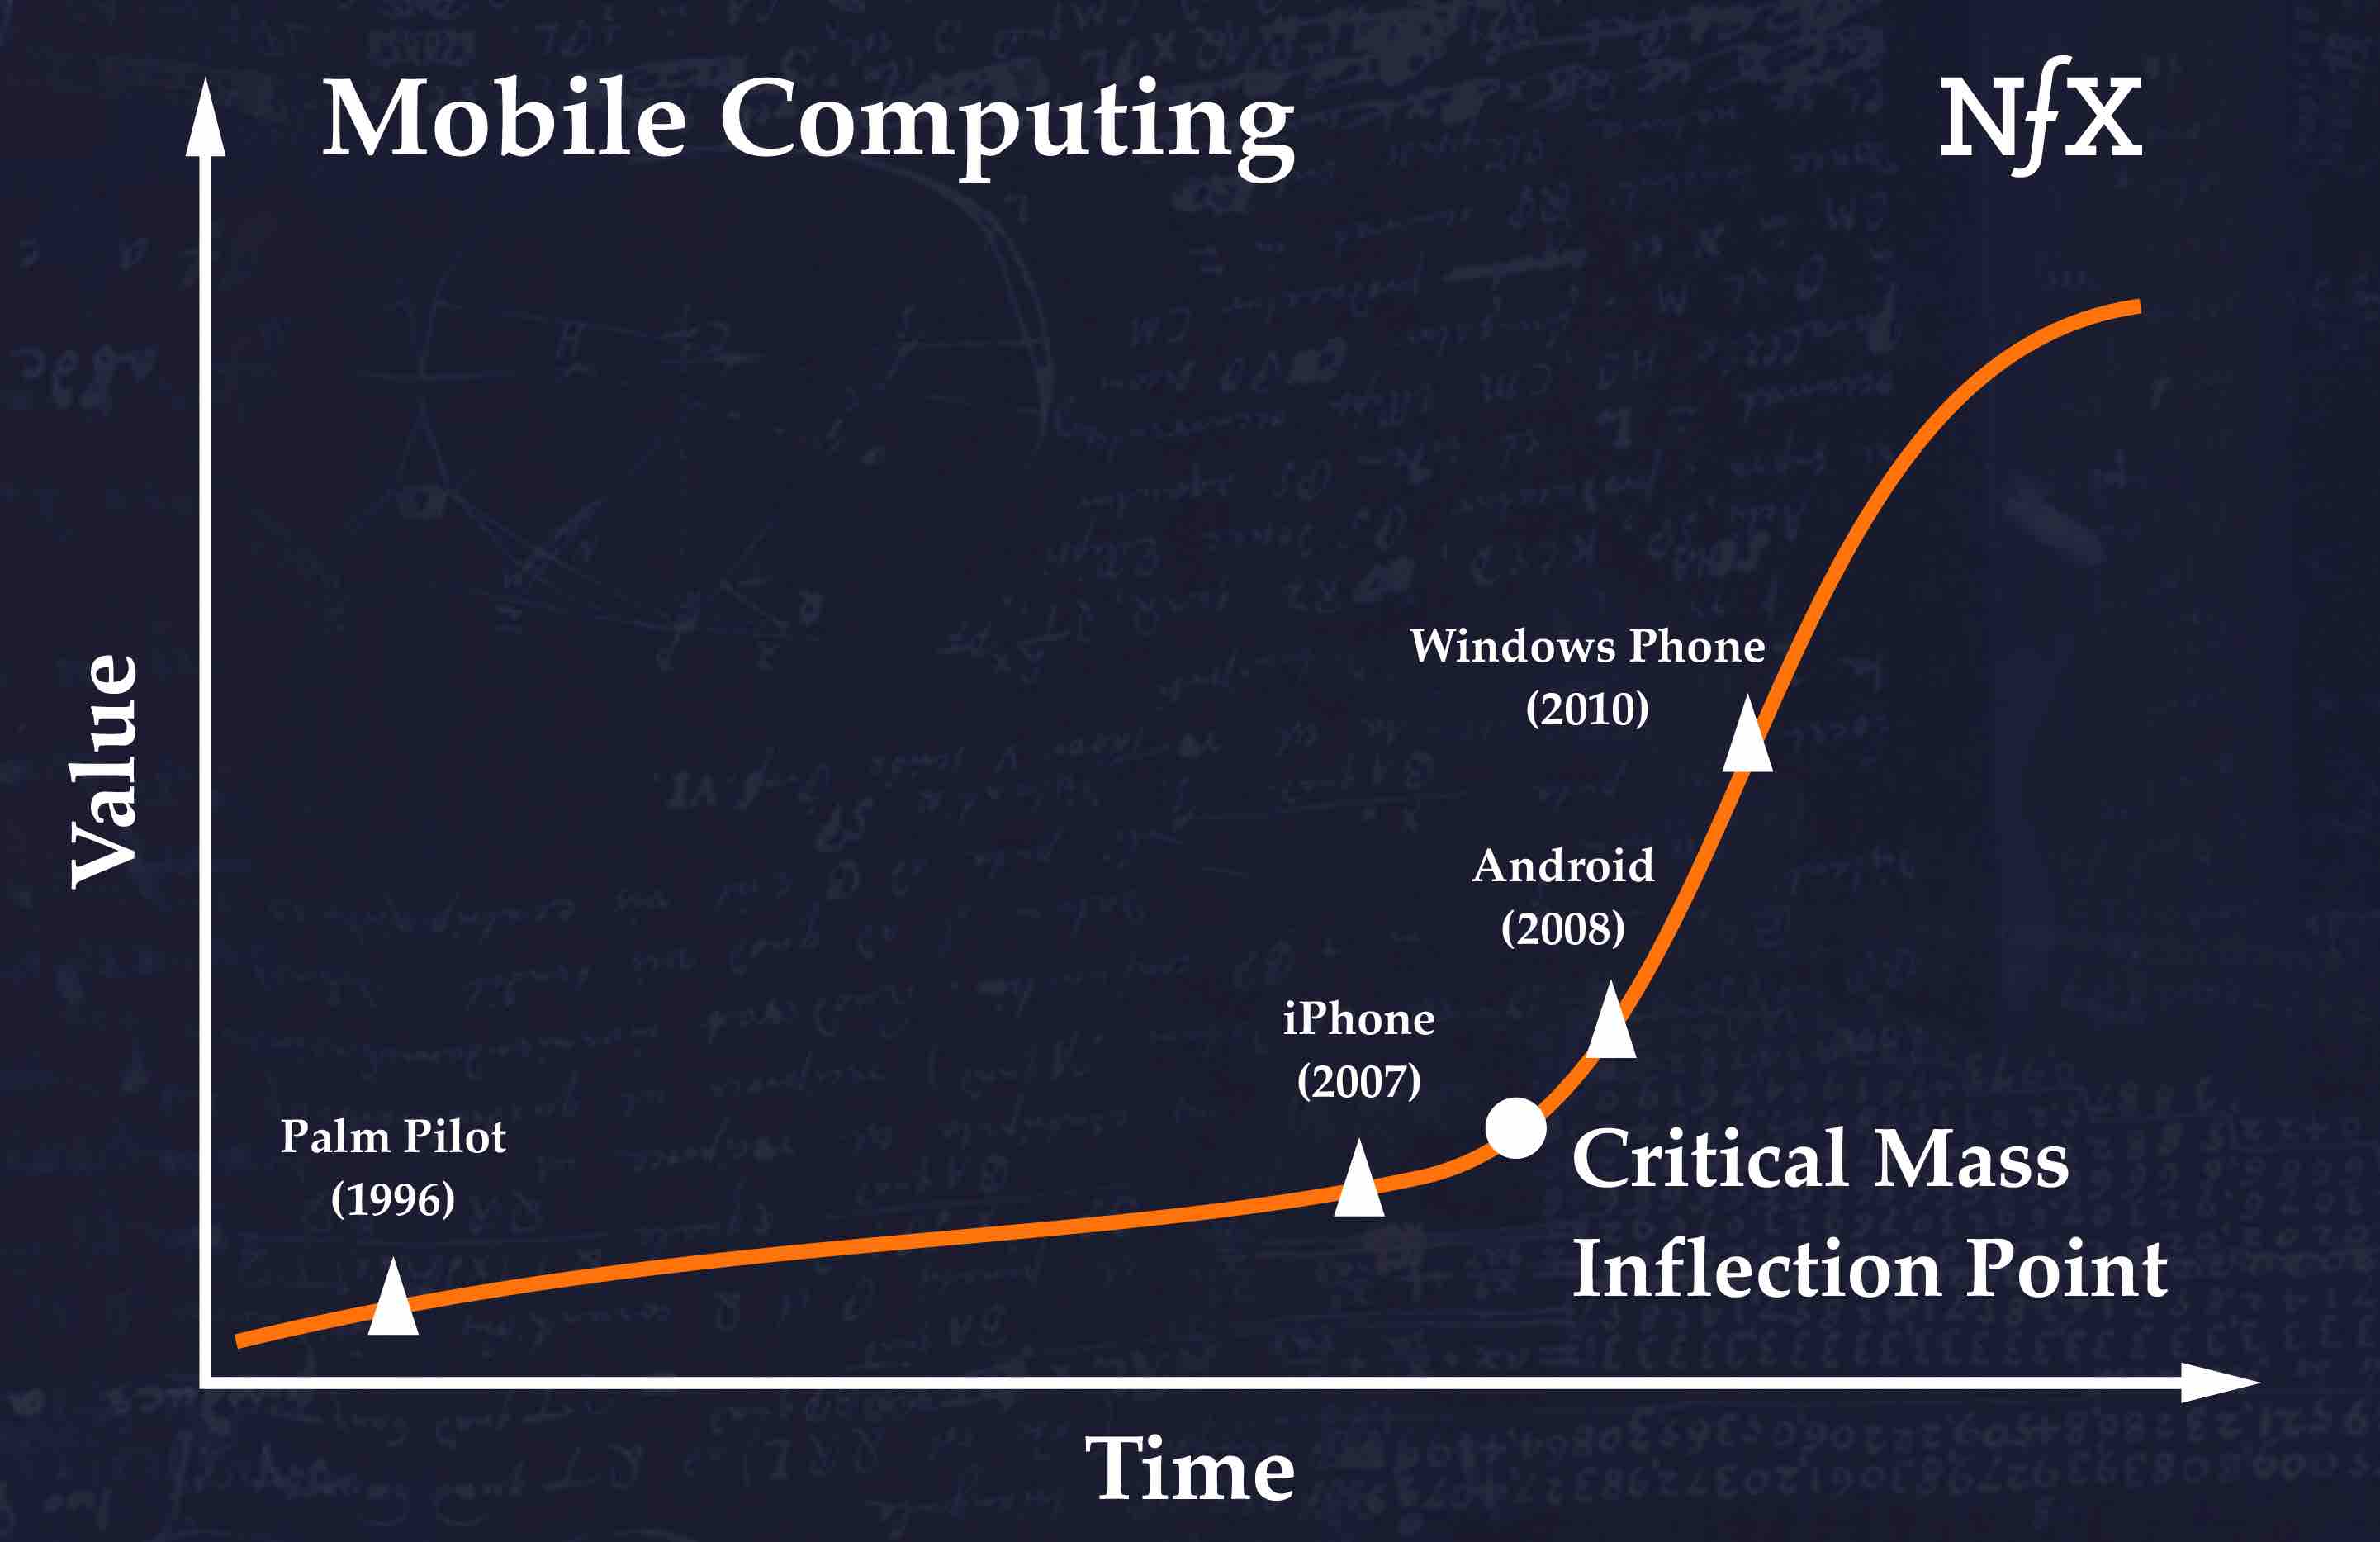 The Ultimate Case Study on Critical Mass: iPhone